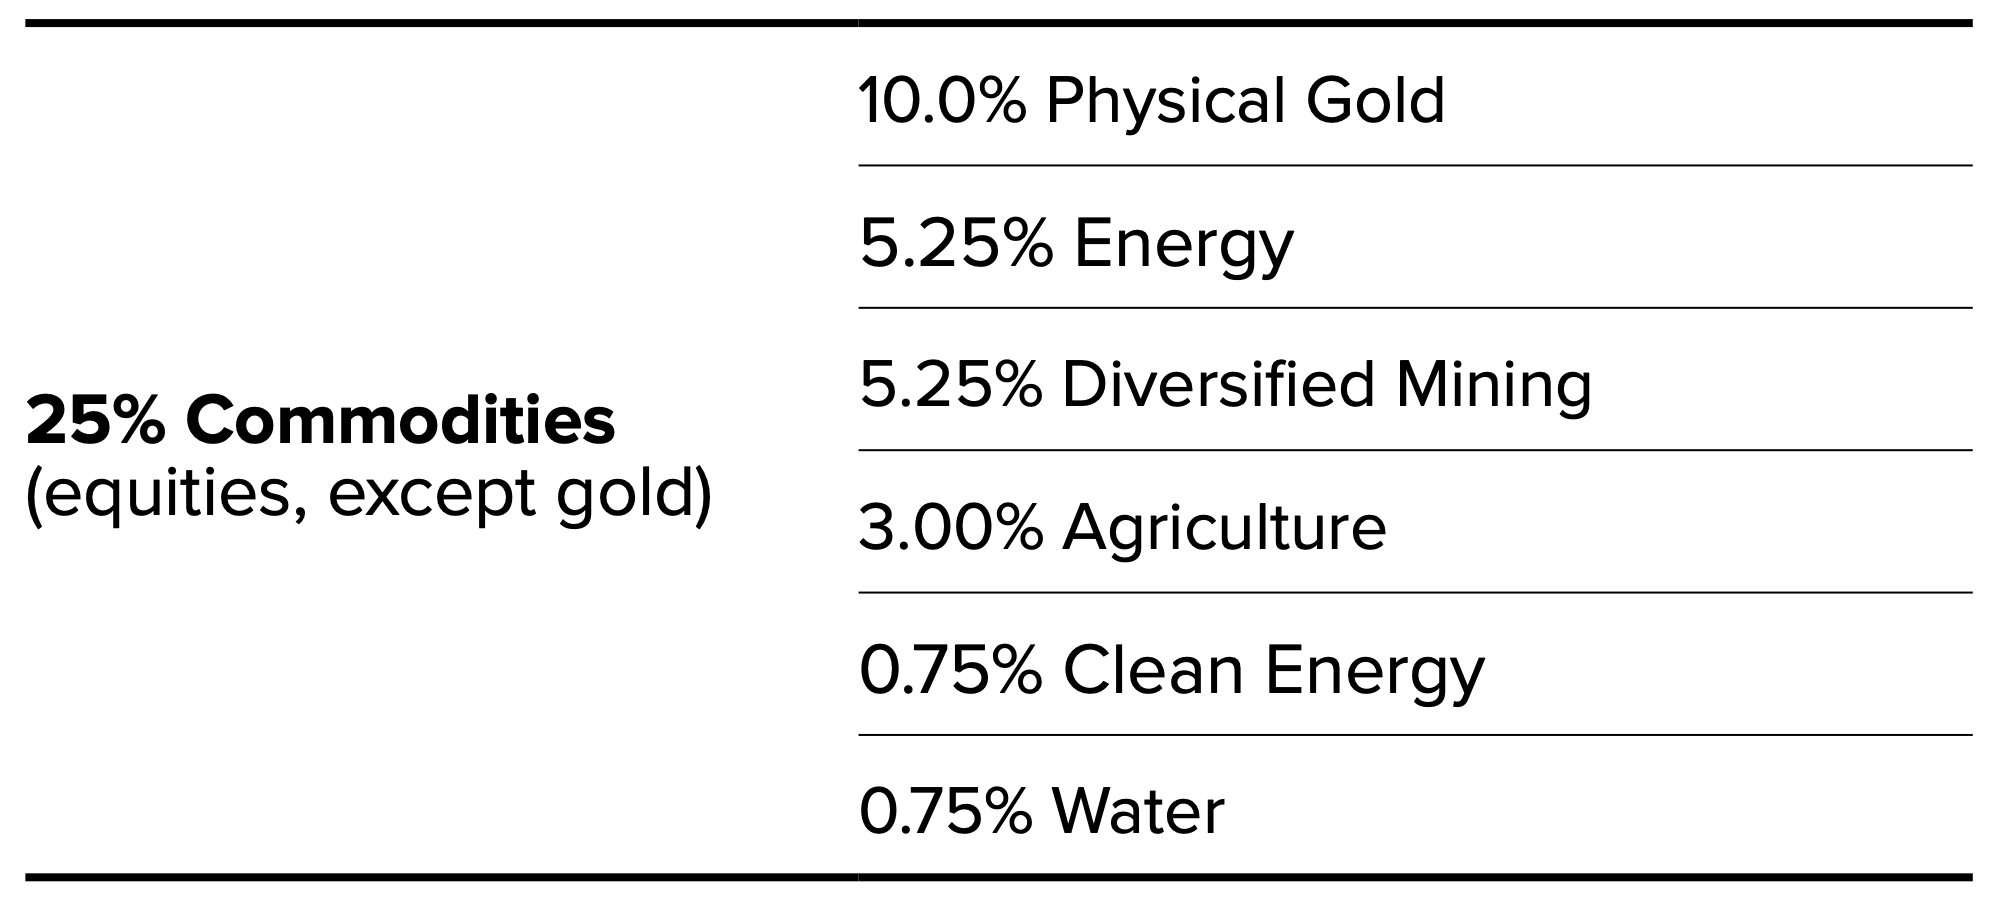 RPAR ETF Commodity Producing Equities and Gold Allocation 